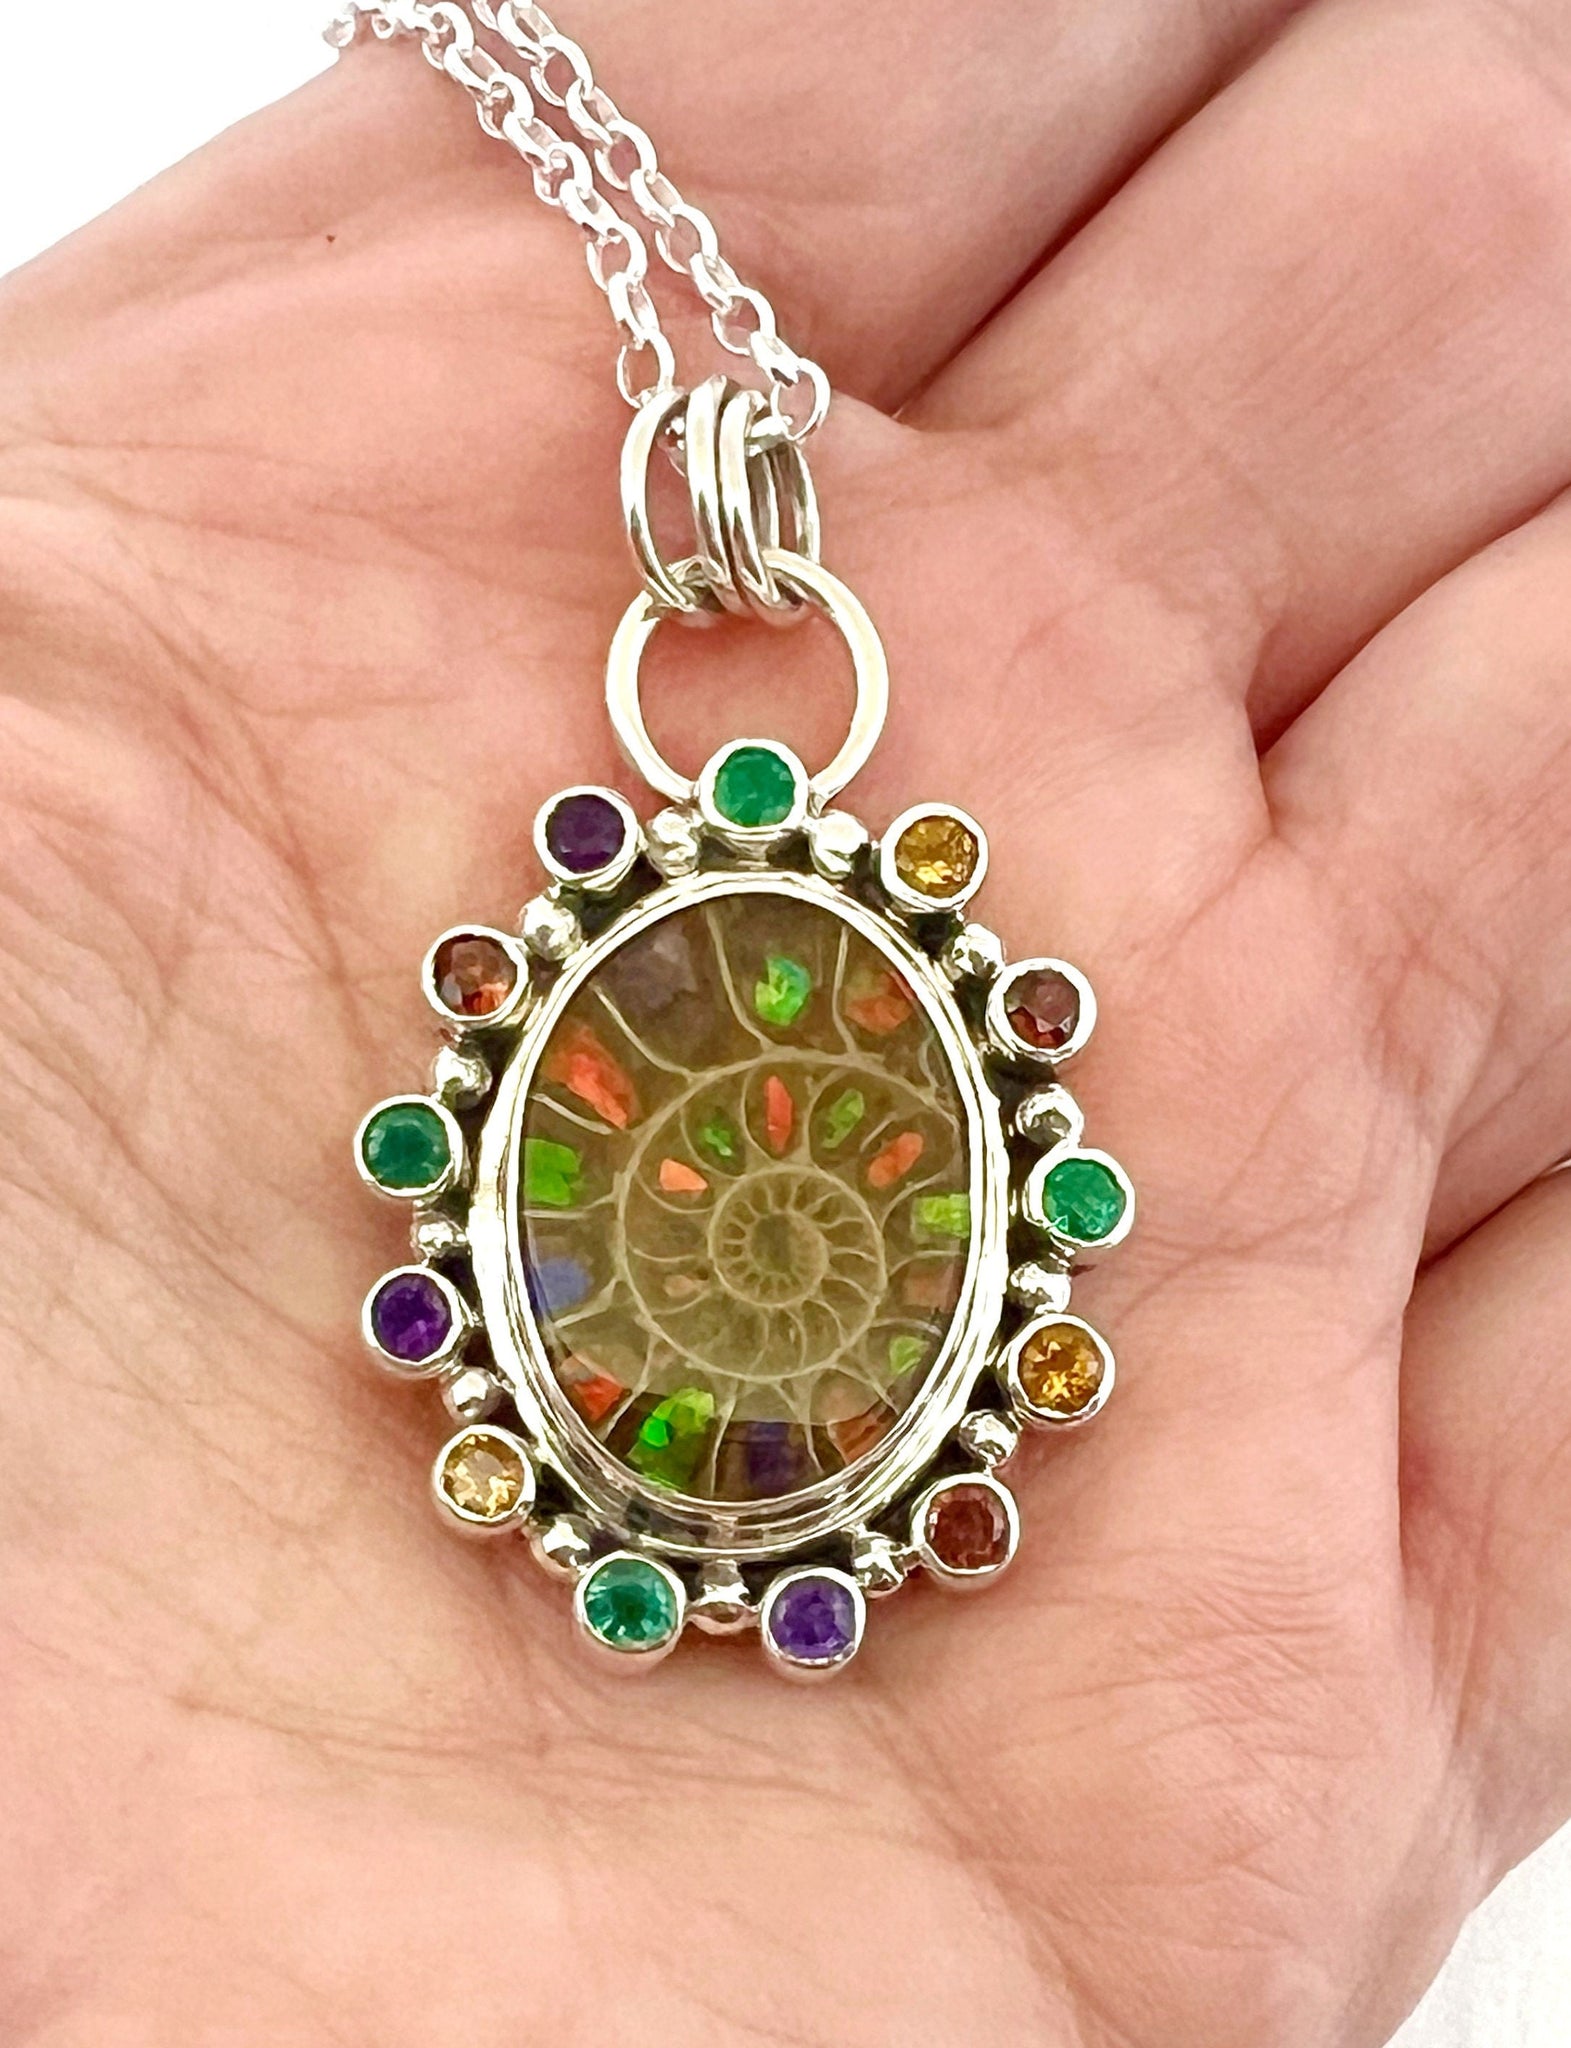 Ammonite Fossil Inlaid with Ammolite Sterling Silver Pendant